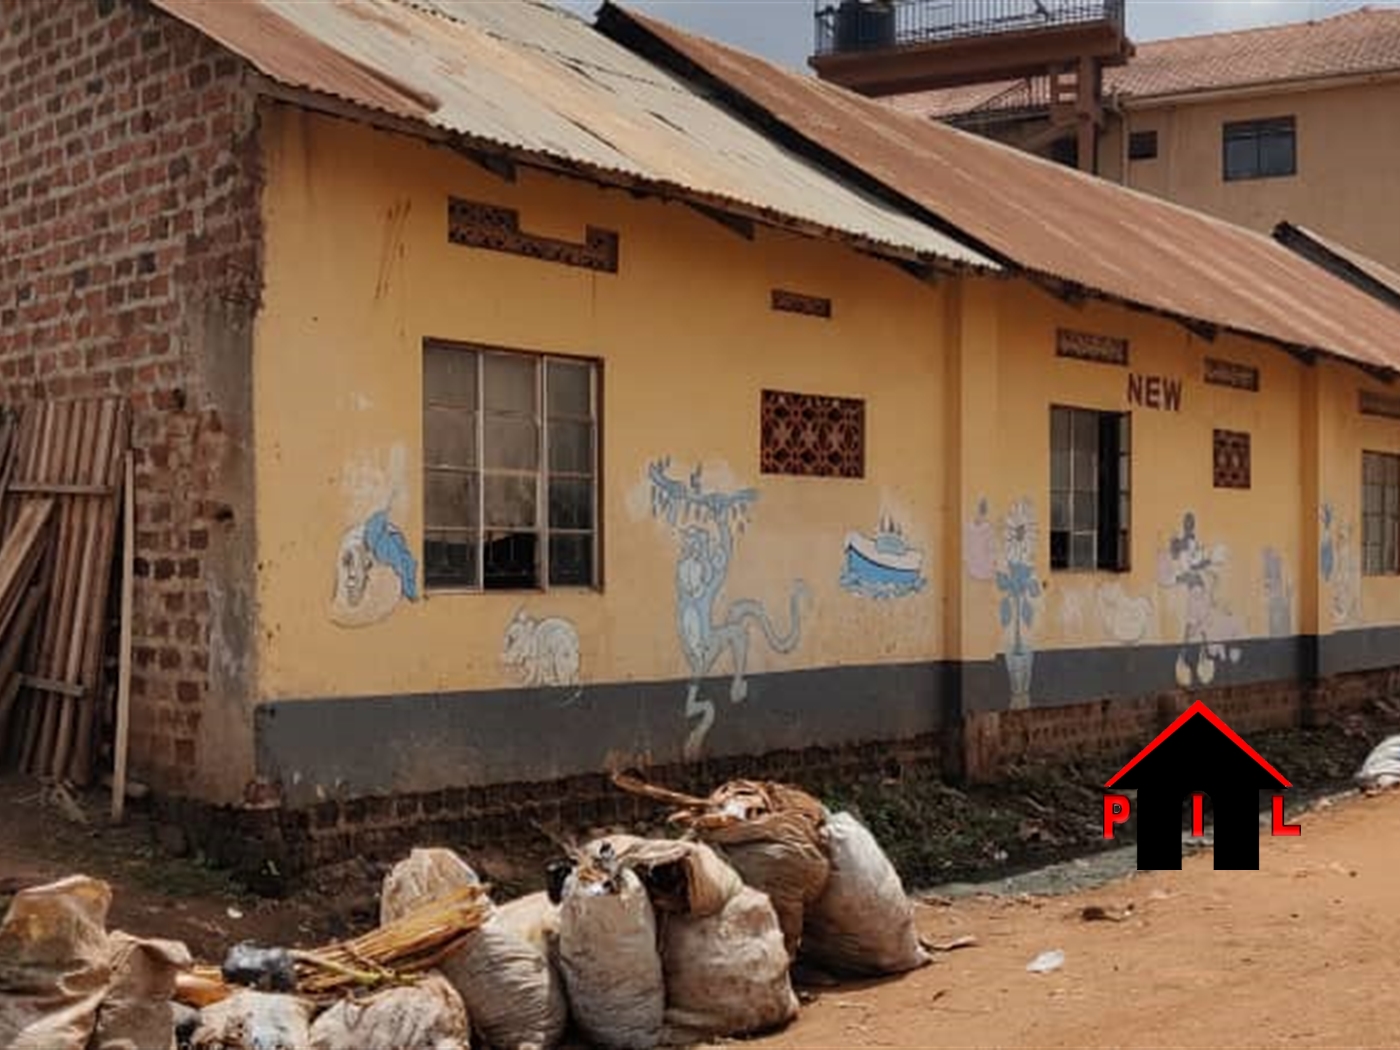 Commercial Land for sale in Nateete Kampala